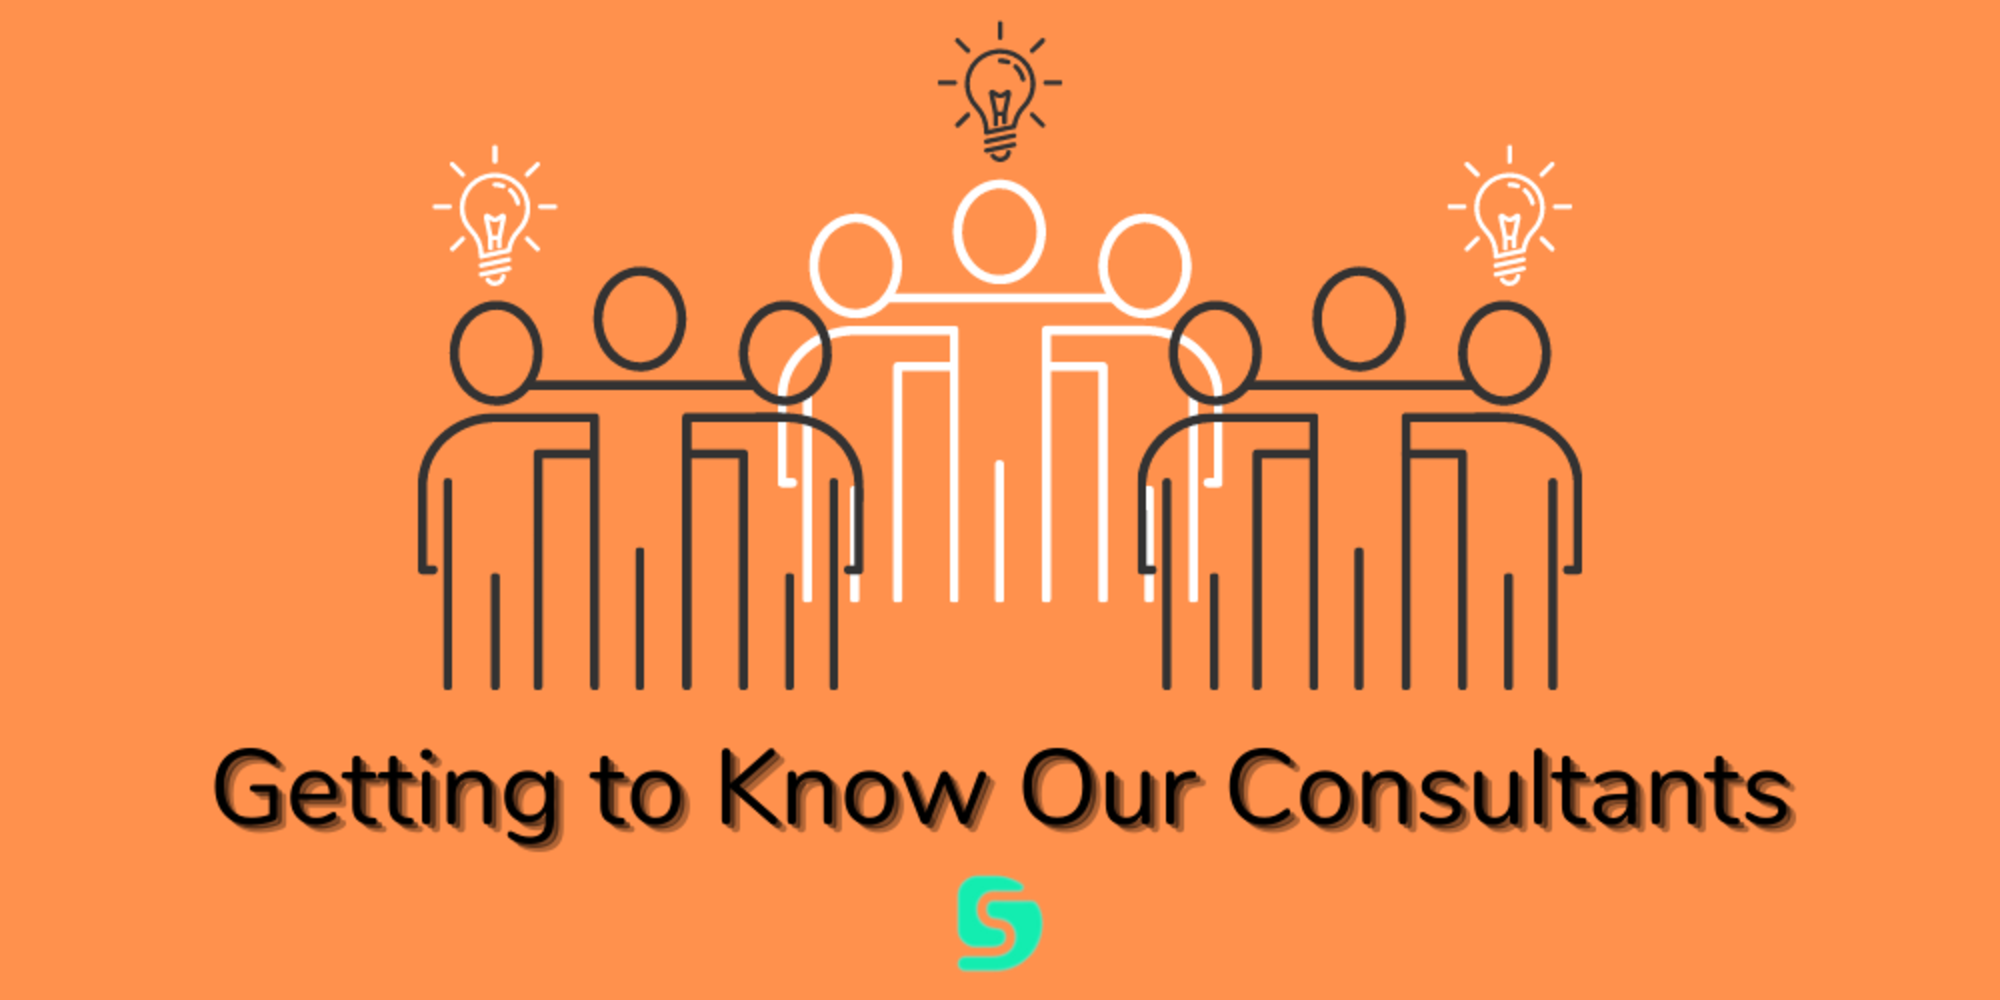 Getting To Know Our Consultants   10 Questions Over 10 Weeks (3)